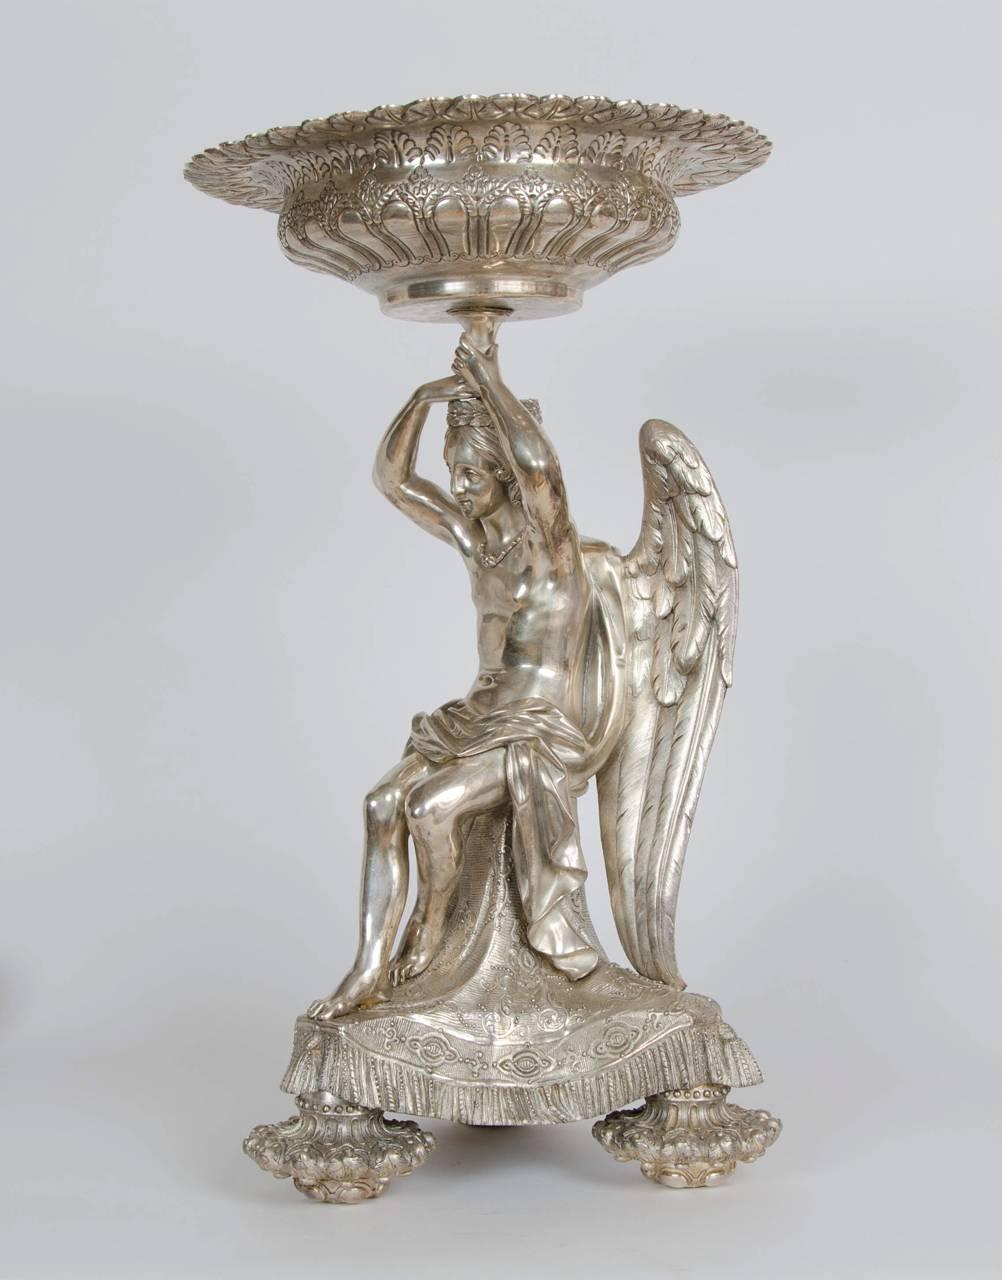 In the form of a winged angel supporting a circular tazza.